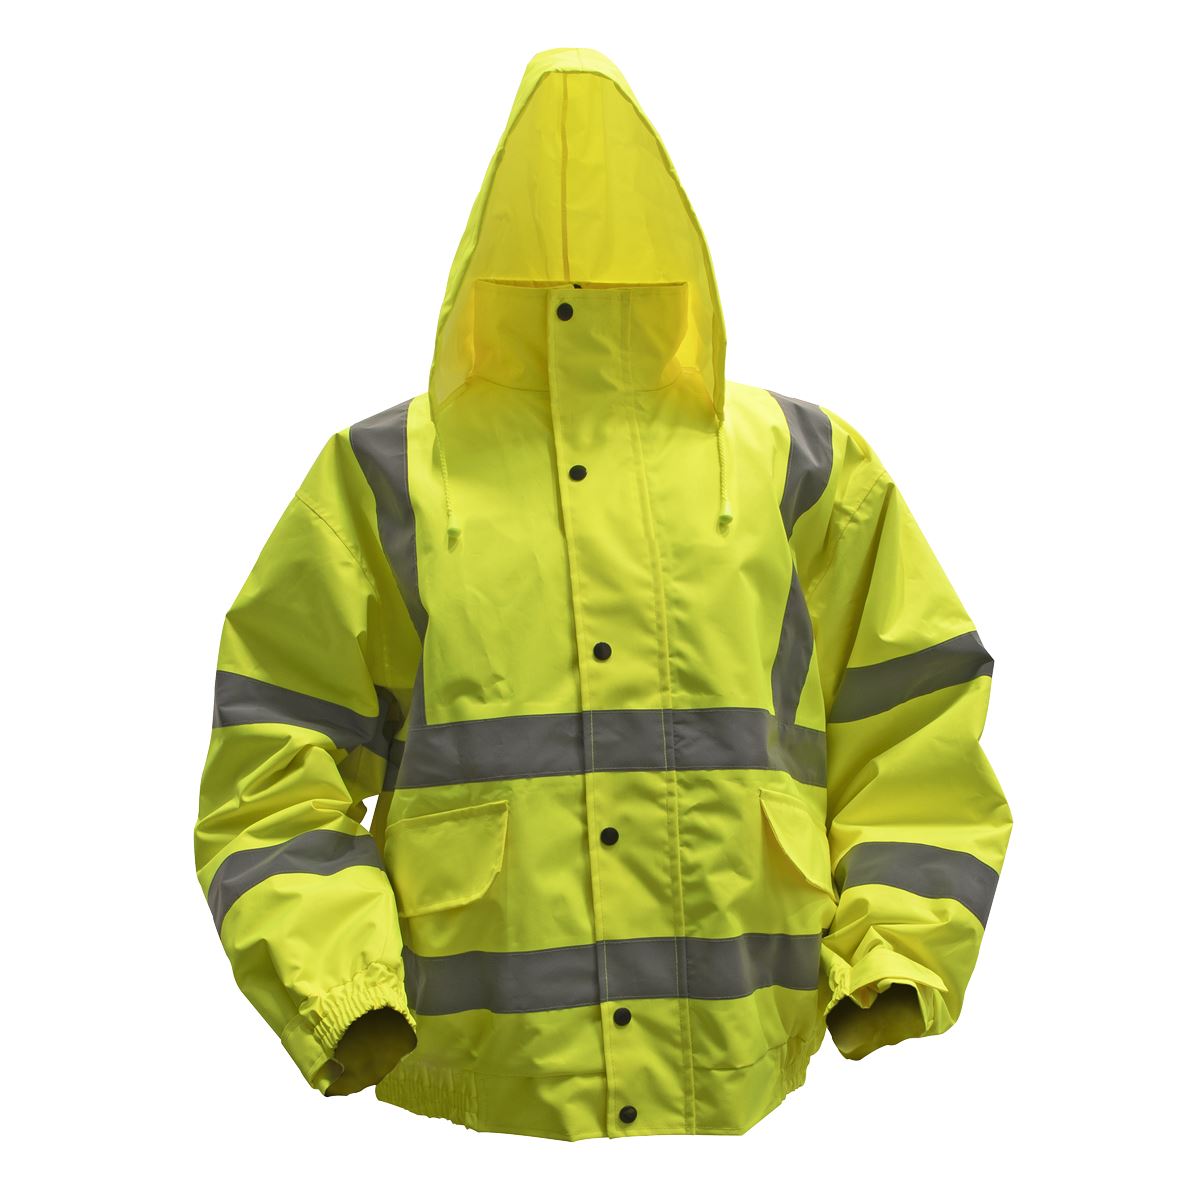 Worksafe by Sealey Hi-Vis Yellow Jacket with Quilted Lining & Elasticated Waist - X-Large